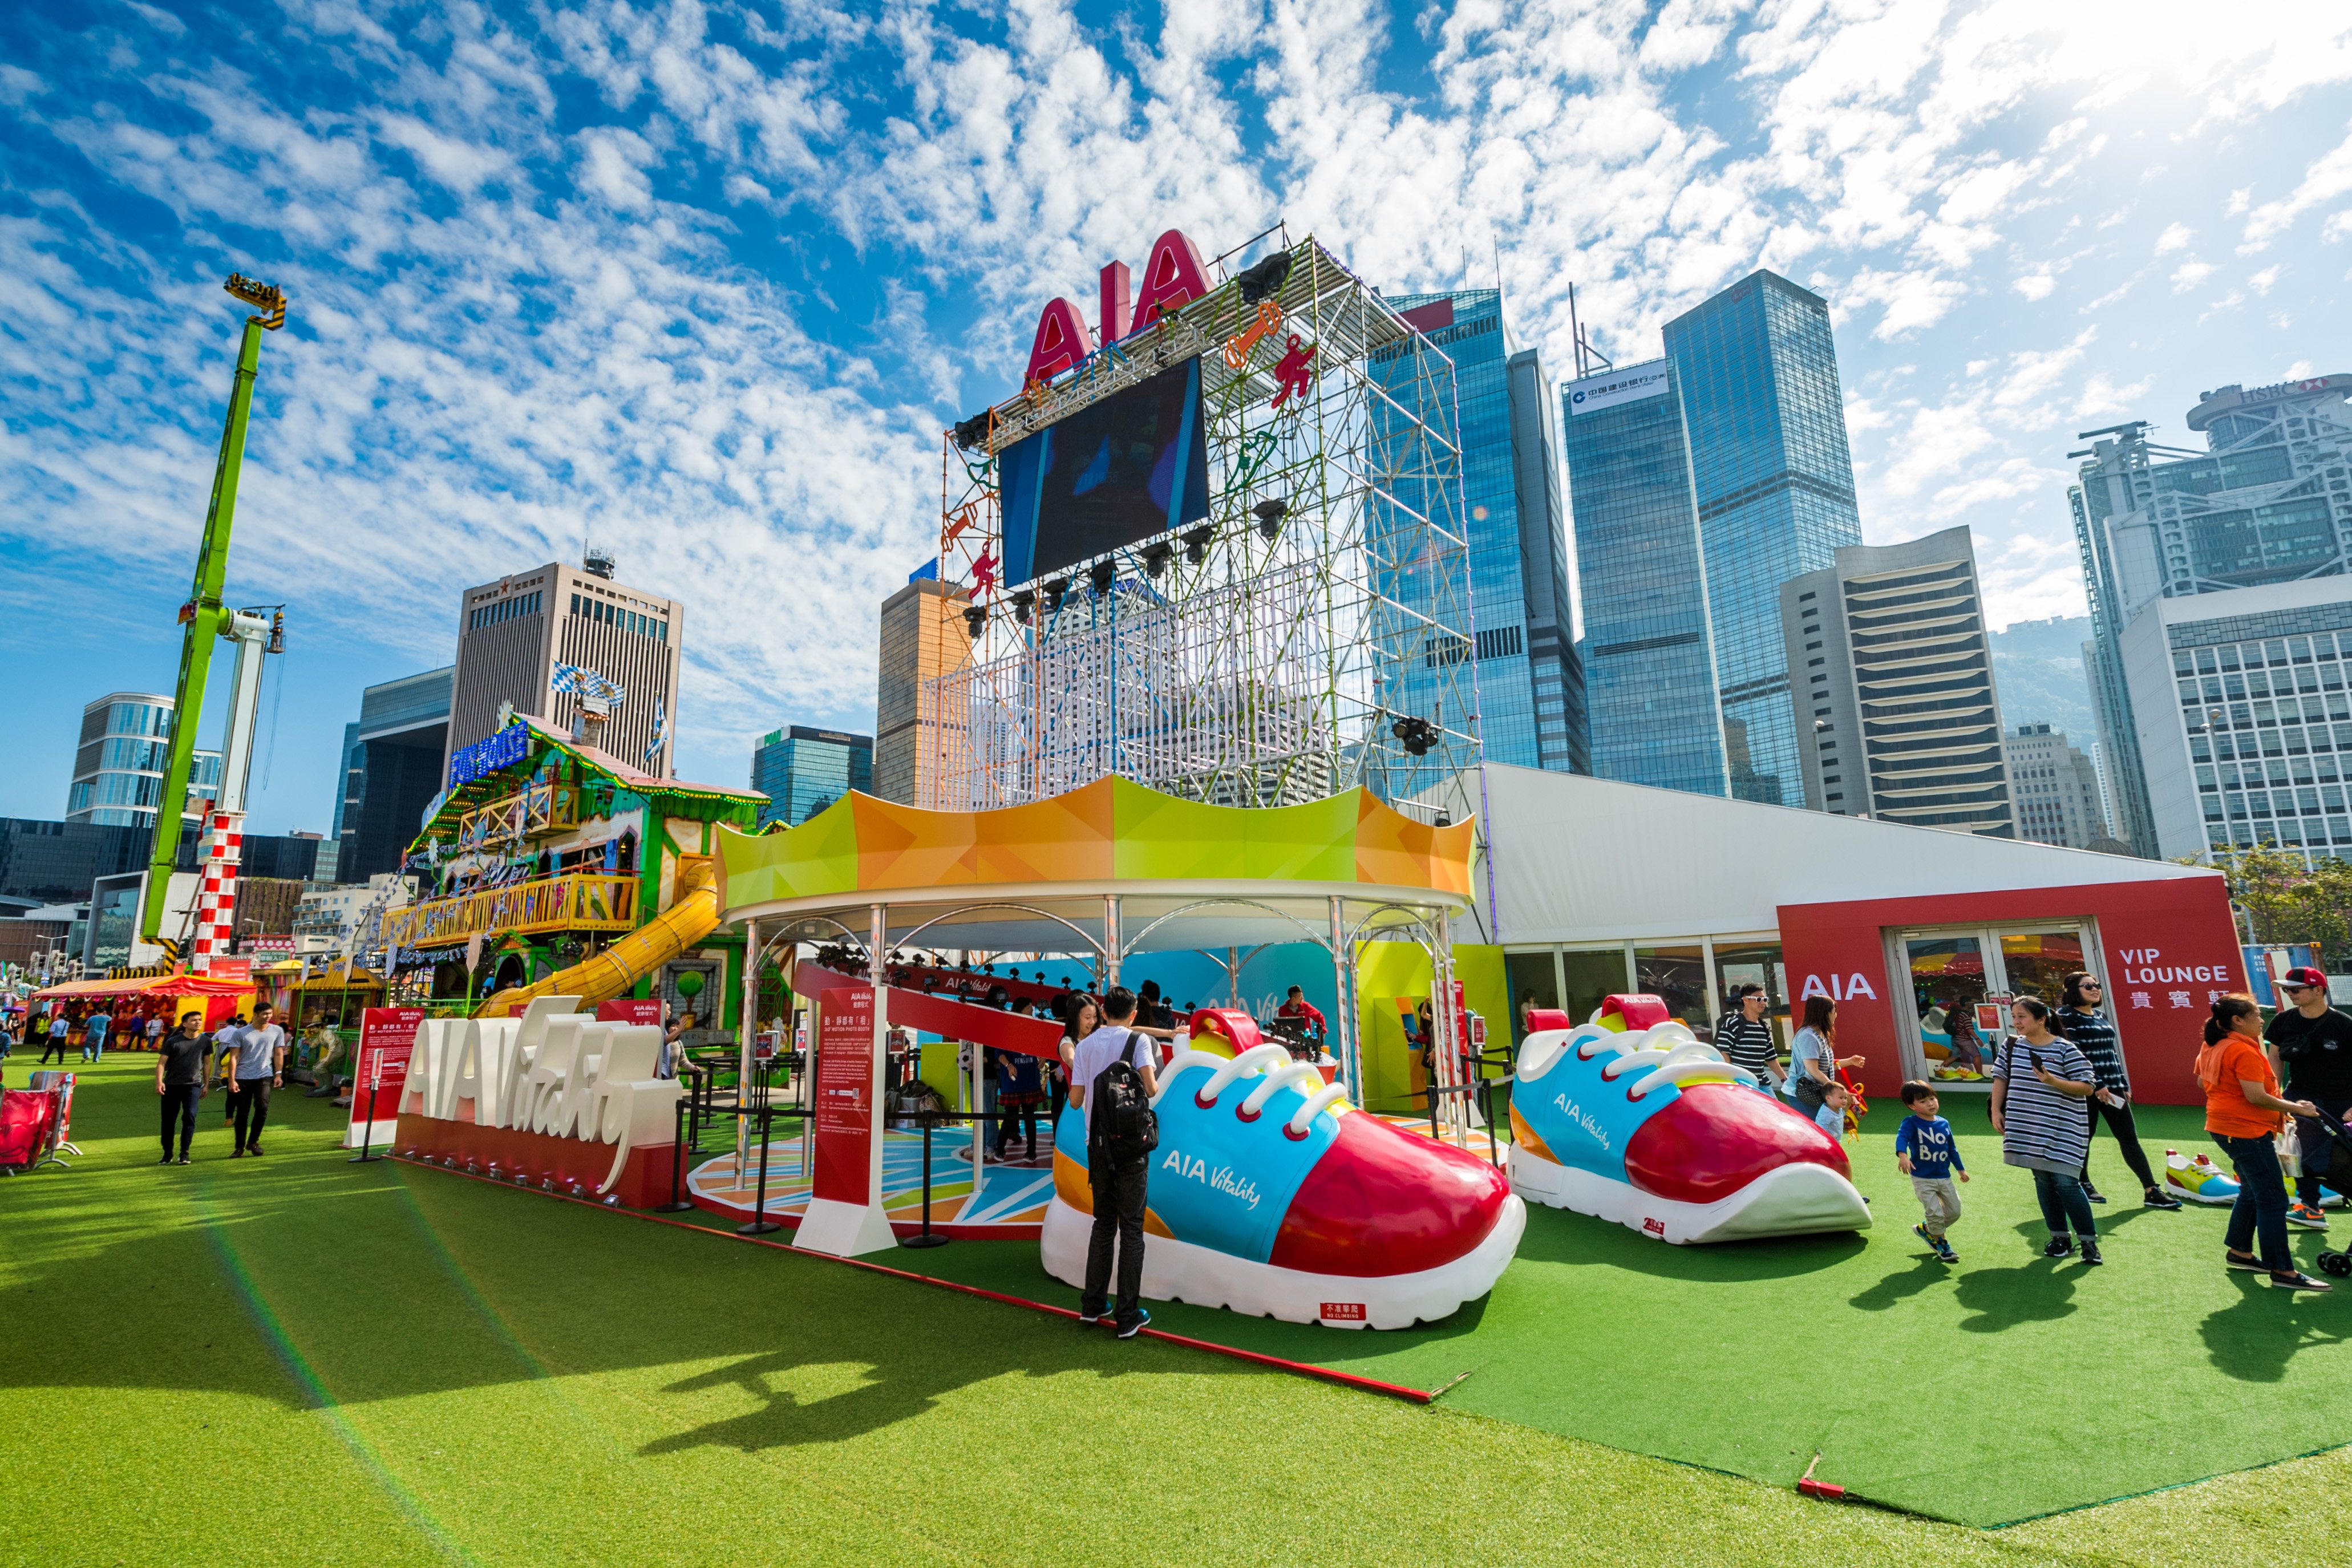 Sponsored by AIA Hong Kong for the third consecutive year, The AIA Great European Carnival brought Hong Kong people many joyful moments and delightful memories.